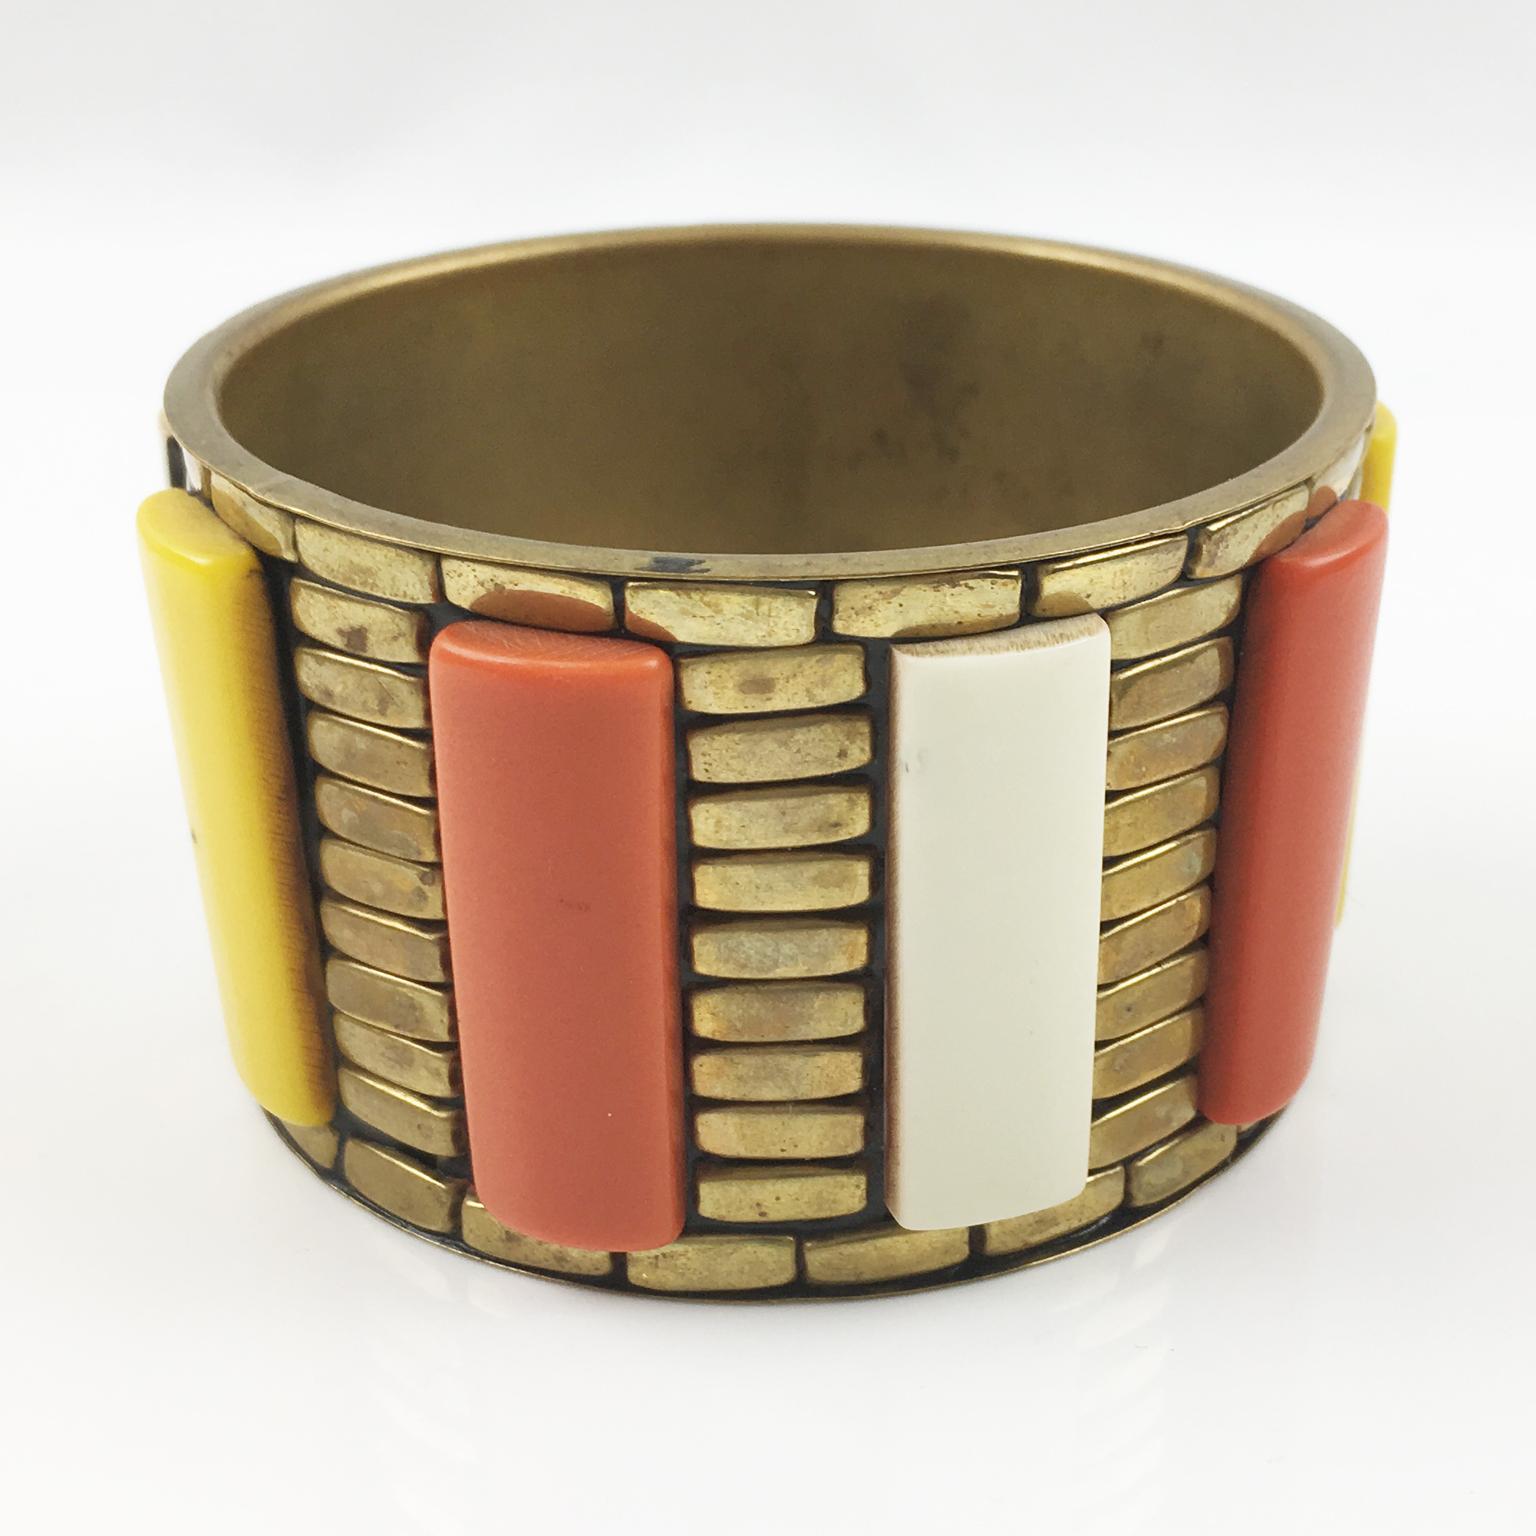 This stunning modernist bracelet features a chunky oversized bangle shape in carved gilded brass with large rectangular Lucite cabochons. Crafted from fine Lucite, the cabochons come in a beautiful assortment of colors including cream-white, yellow,